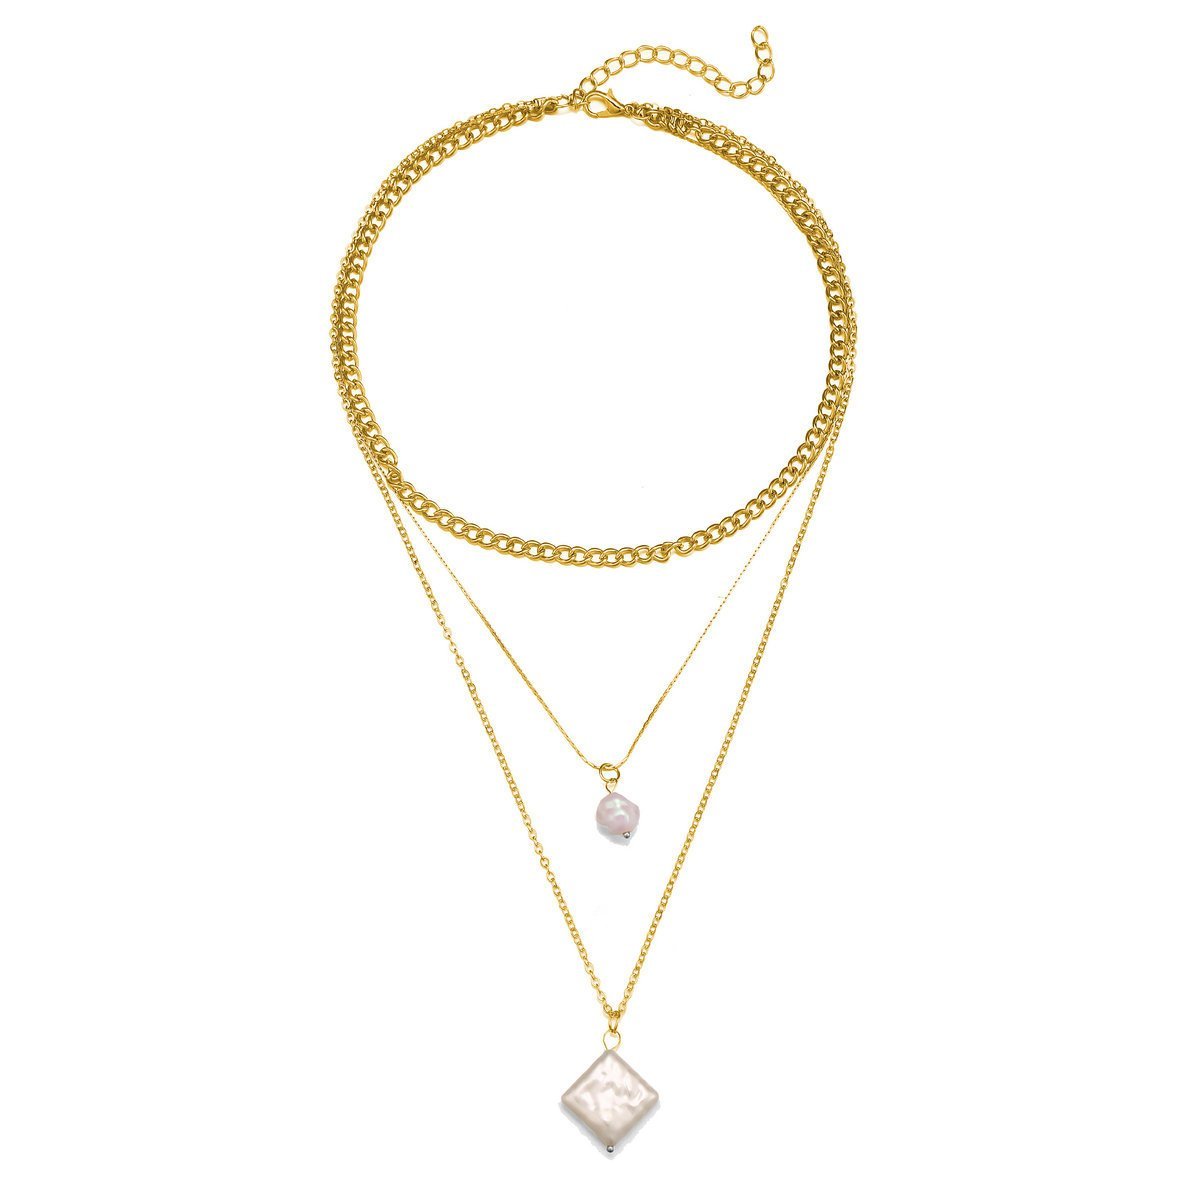 3 Piece Pearl Linear Chain Necklace in 18K Gold Plated ITALY Design